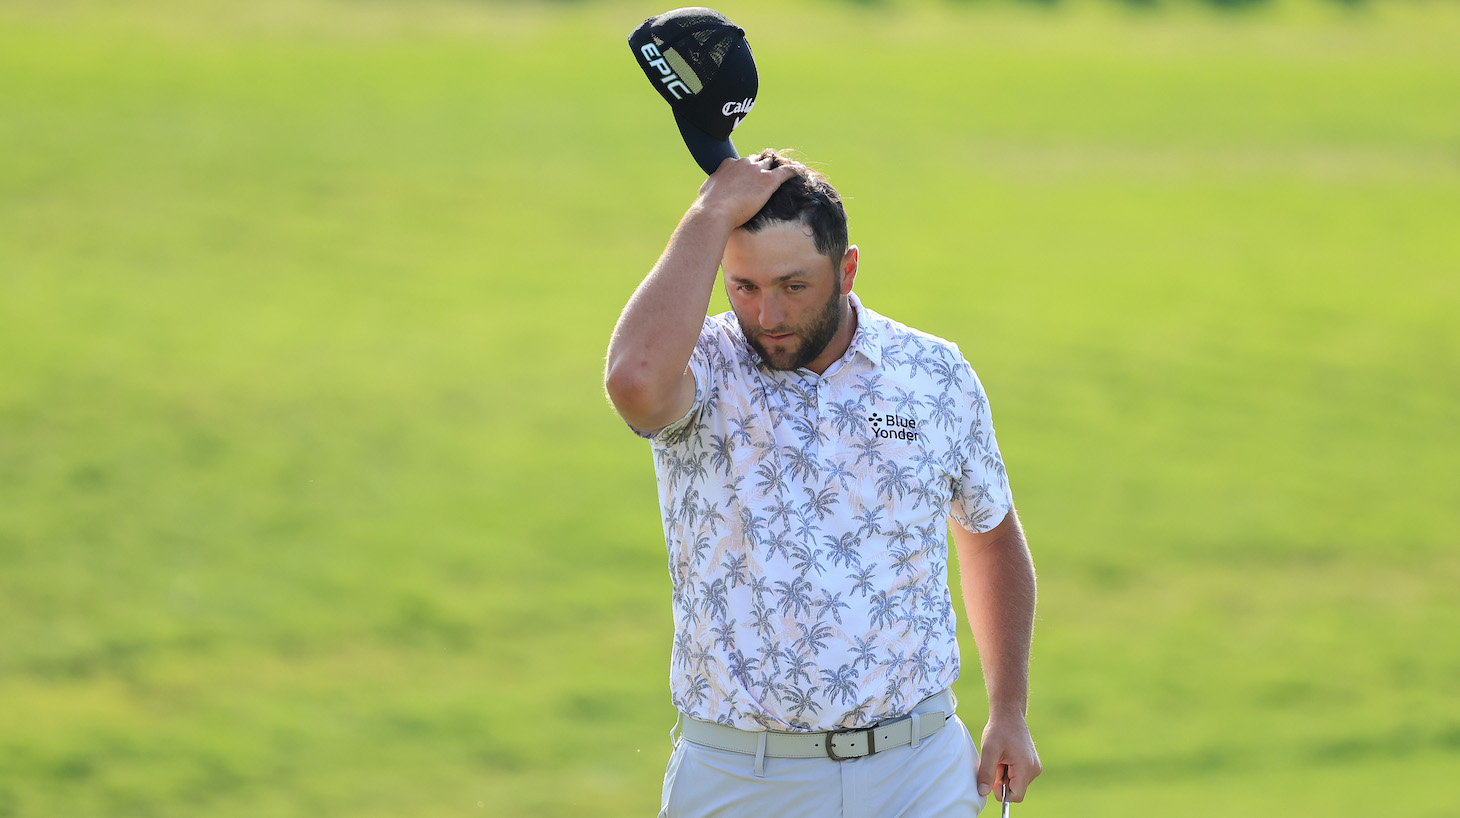 Jon Rahm of Spain reacts as he walks off the 18th green after completing his third round of The Memorial Tournament at Muirfield Village Golf Club on June 05, 2021 in Dublin, Ohio.